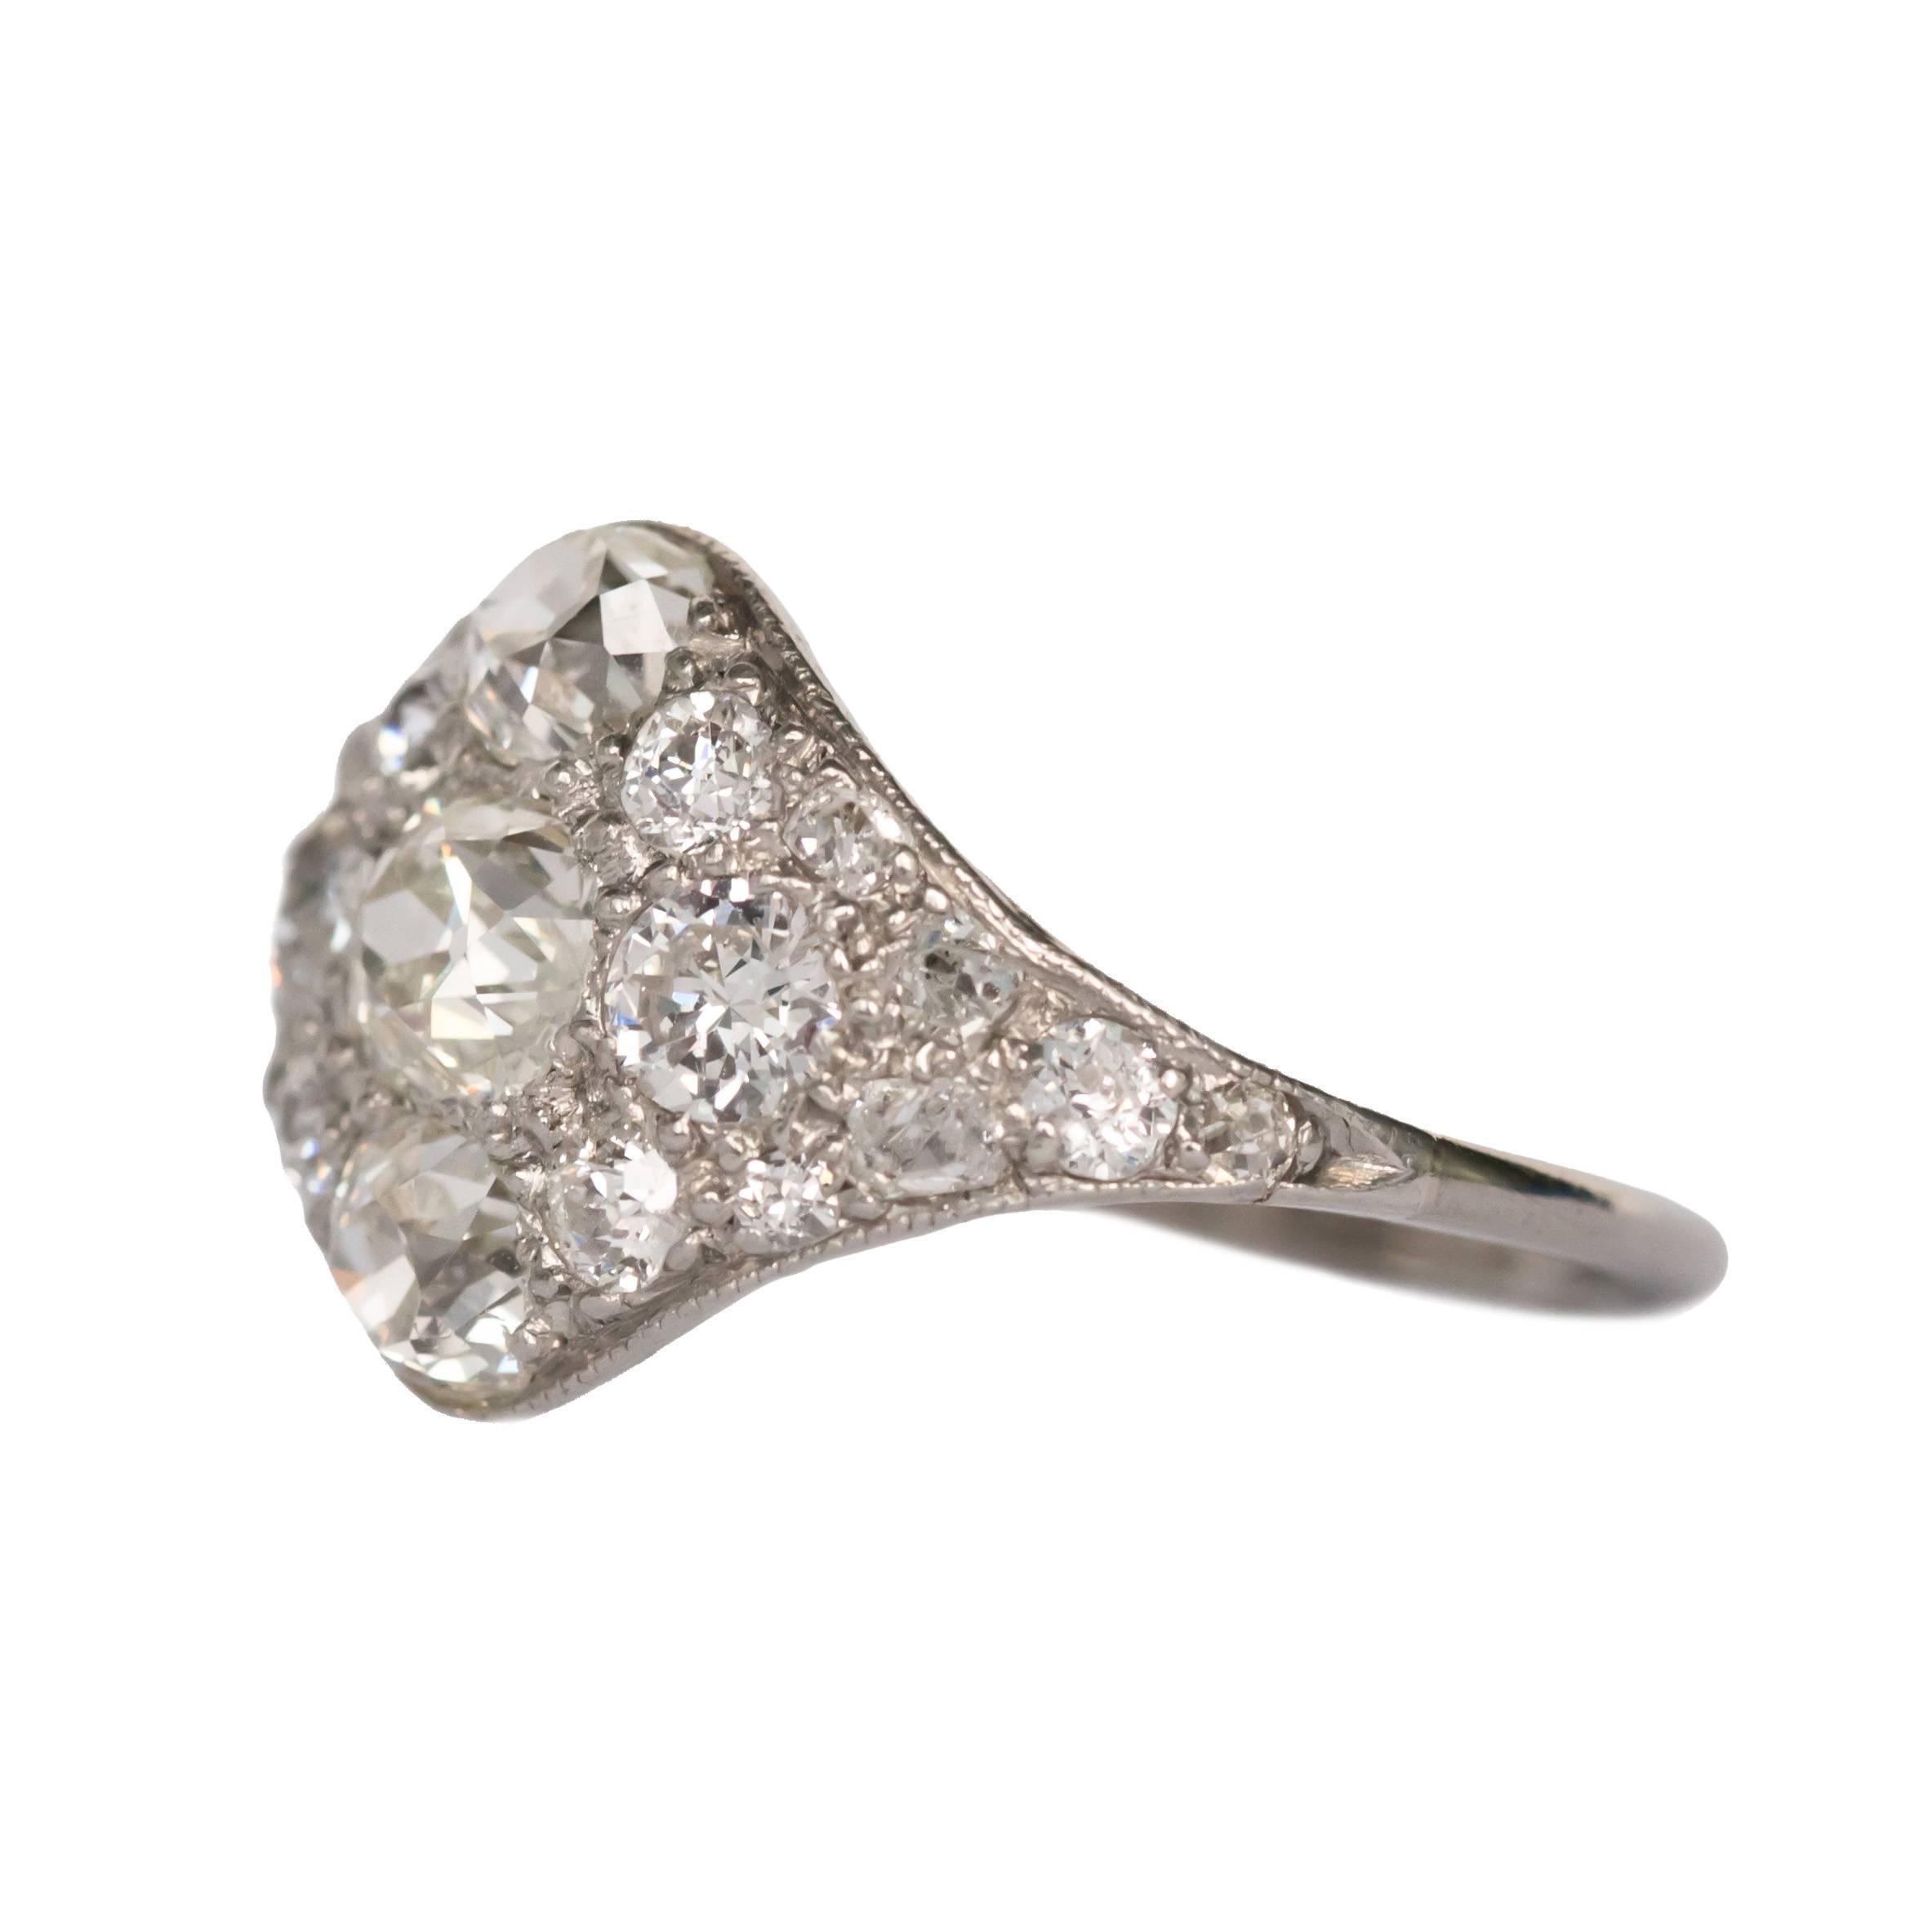 Item Details: 
Ring Size: 7.25
Metal Type: Platinum
Weight: 3.9 grams

Center Diamond Details:
Shape: Old Mine Brilliant
Carat Weight: .70 carat
Color: G
Clarity: VS1

Side Stone Details: 
Shape: Old Mine Cushion
Total Carat Weight: 1.00 carat,